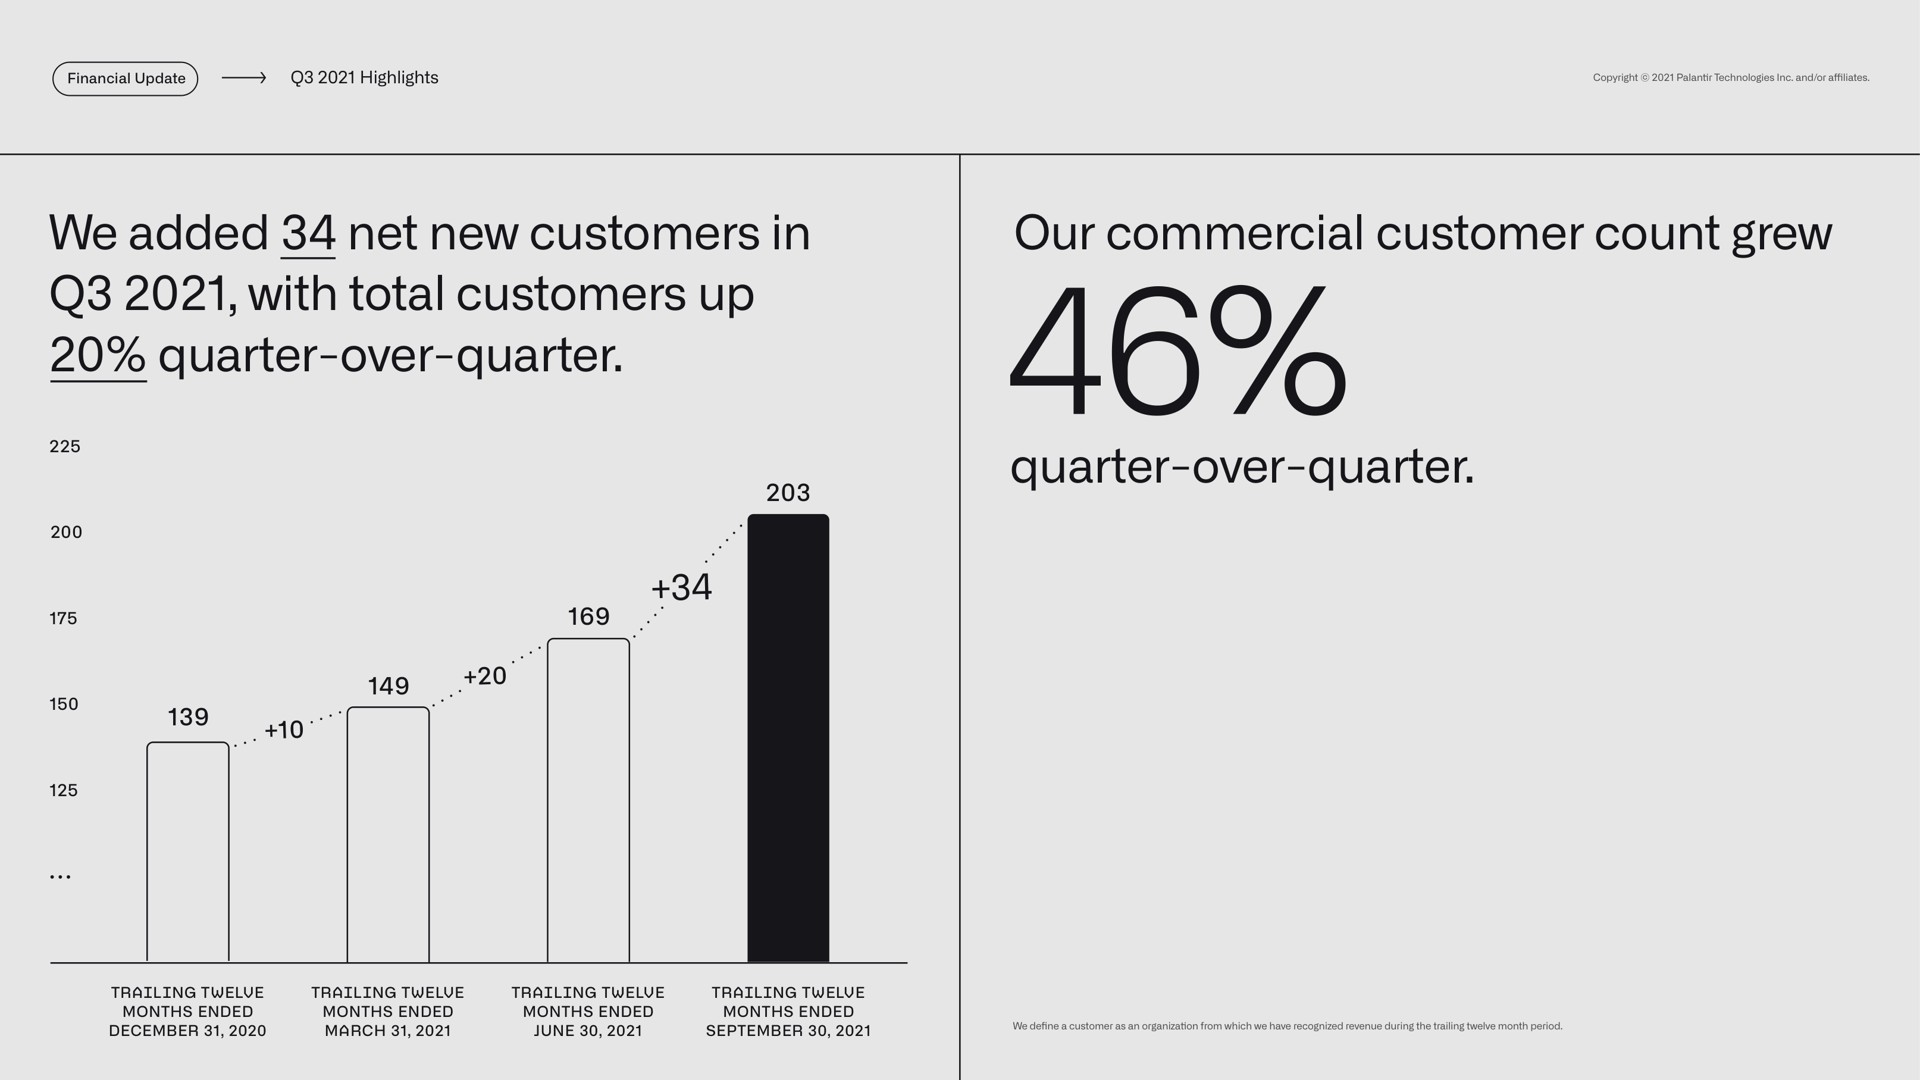 highlights we added net new customers in with total customers up quarter over quarter our commercial customer count grew quarter over quarter trailing twelve months ended trailing twelve months ended march trailing twelve months ended june trailing twelve months ended quarter over quarter | Palantir